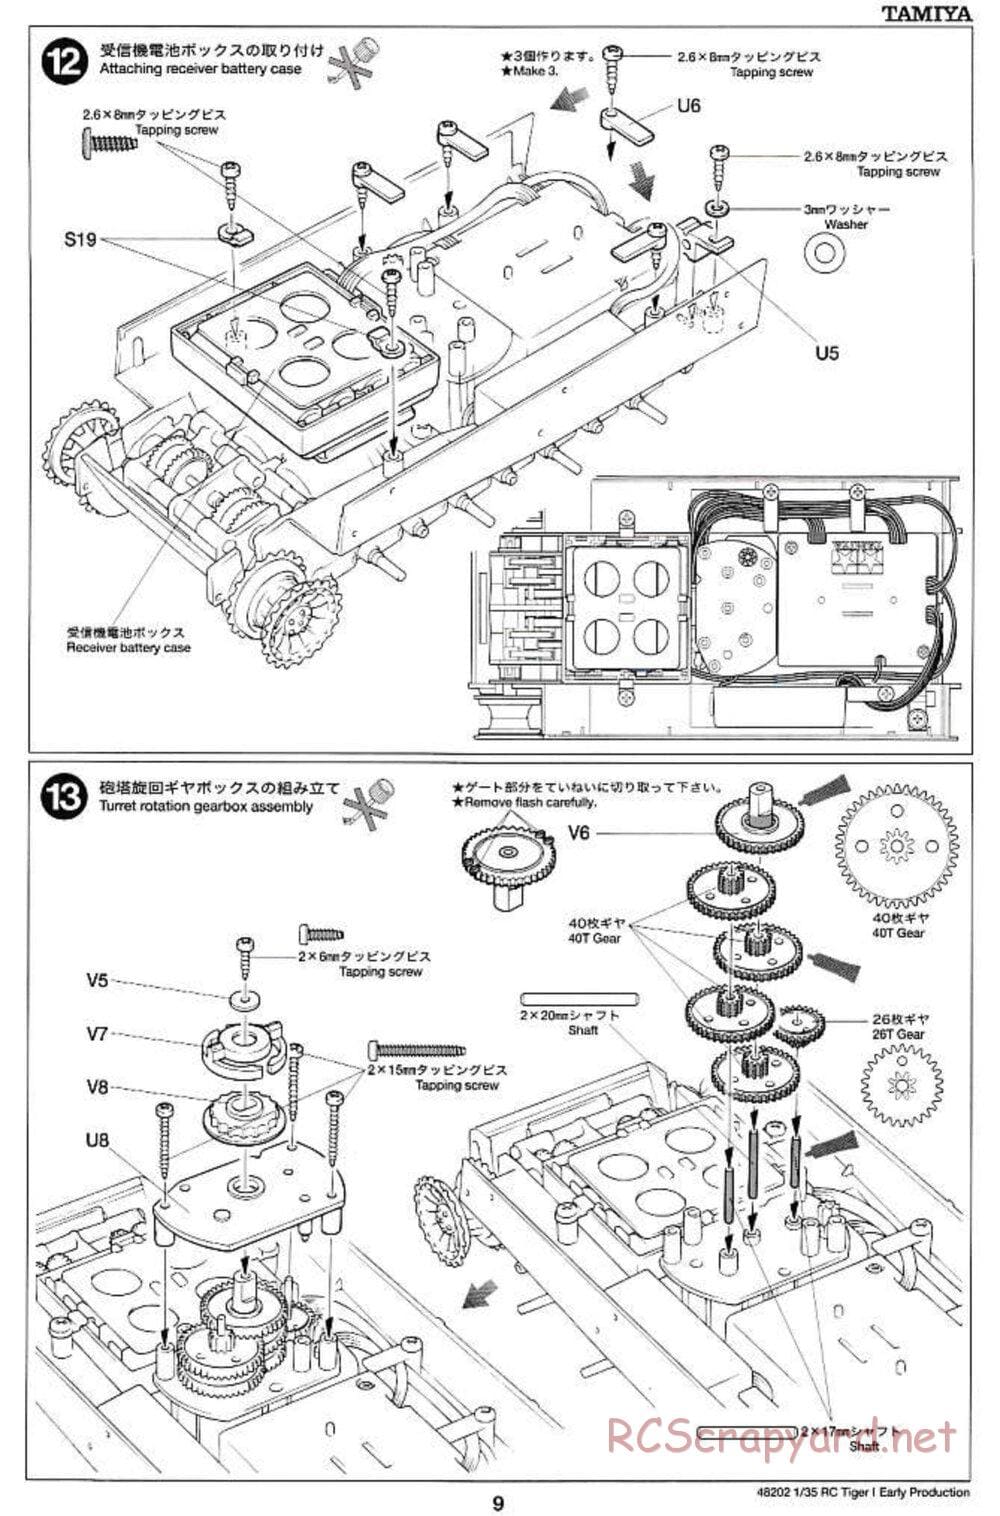 Tamiya - German Tiger 1 Early Production - 1/35 Scale Chassis - Manual - Page 9